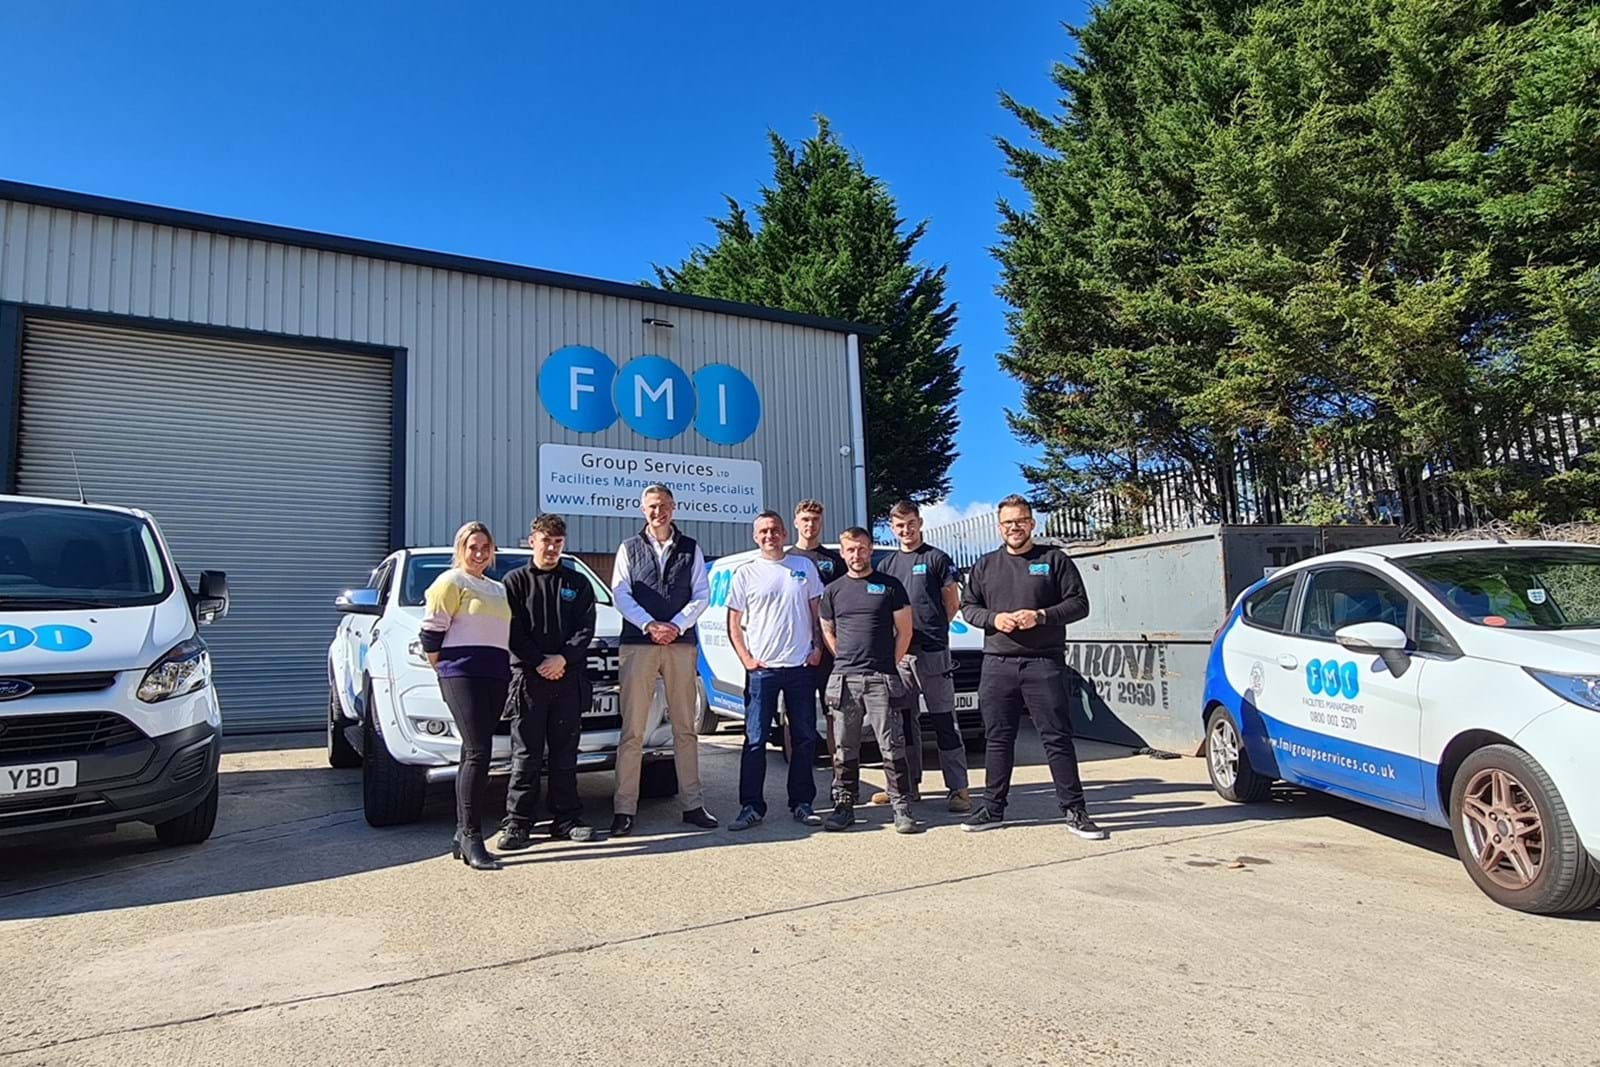 FMI joins the growing HPS Services Group